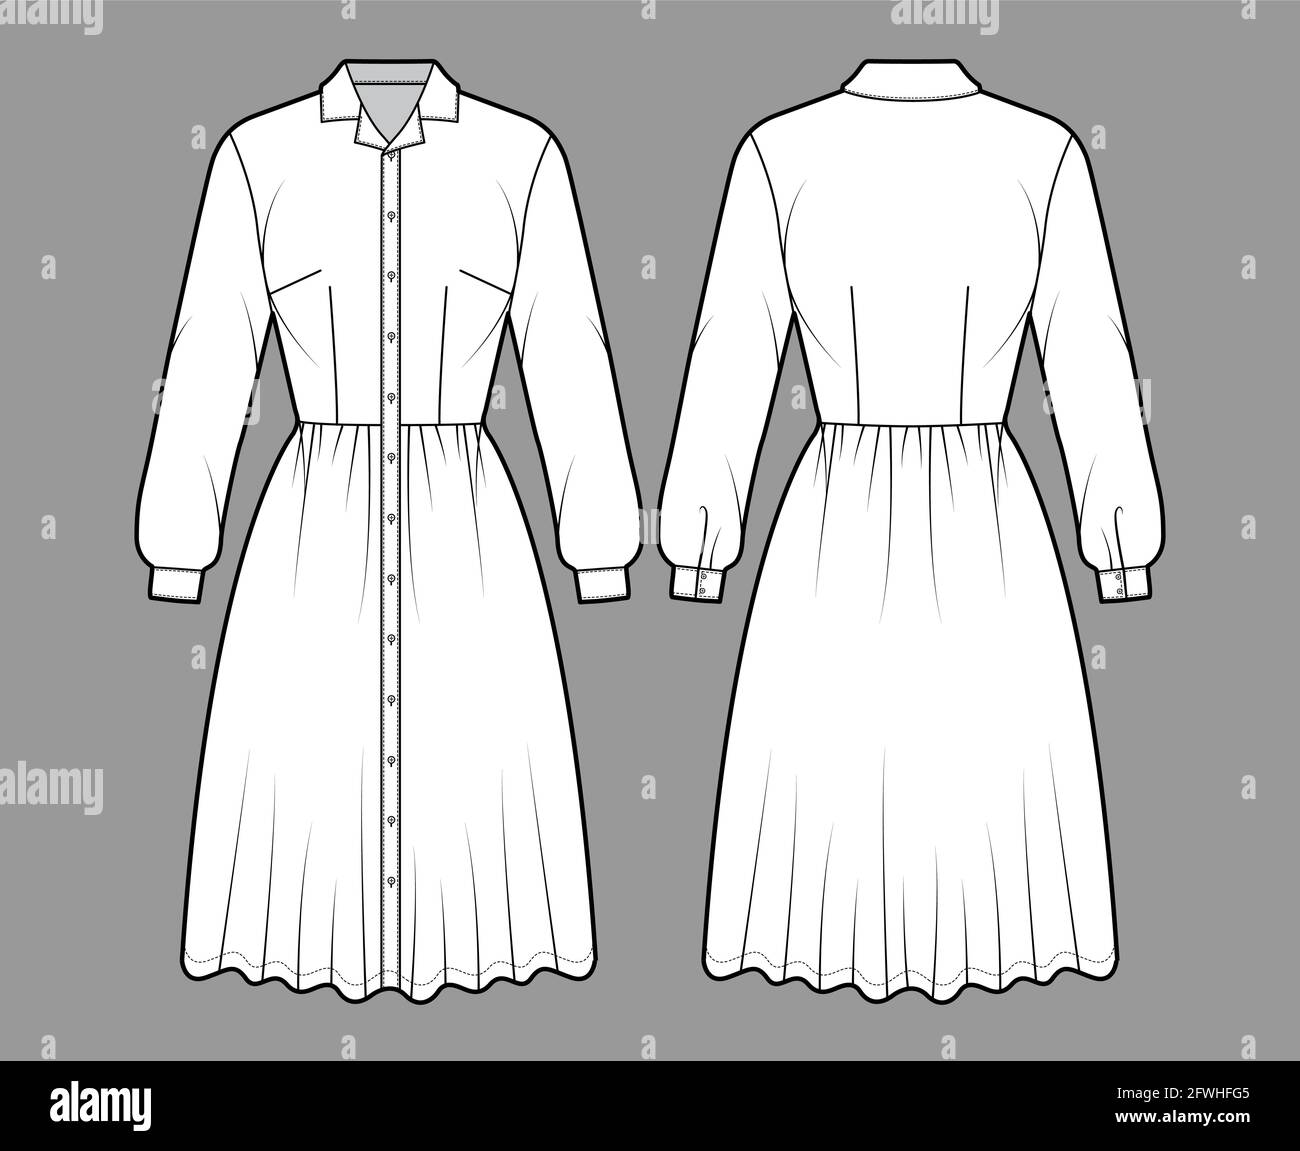 Dress shirt technical fashion illustration with long sleeves, camp collar, fitted body, knee length full skirt, button closure. Flat apparel front, back, white color style. Women men unisex CAD mockup Stock Vector